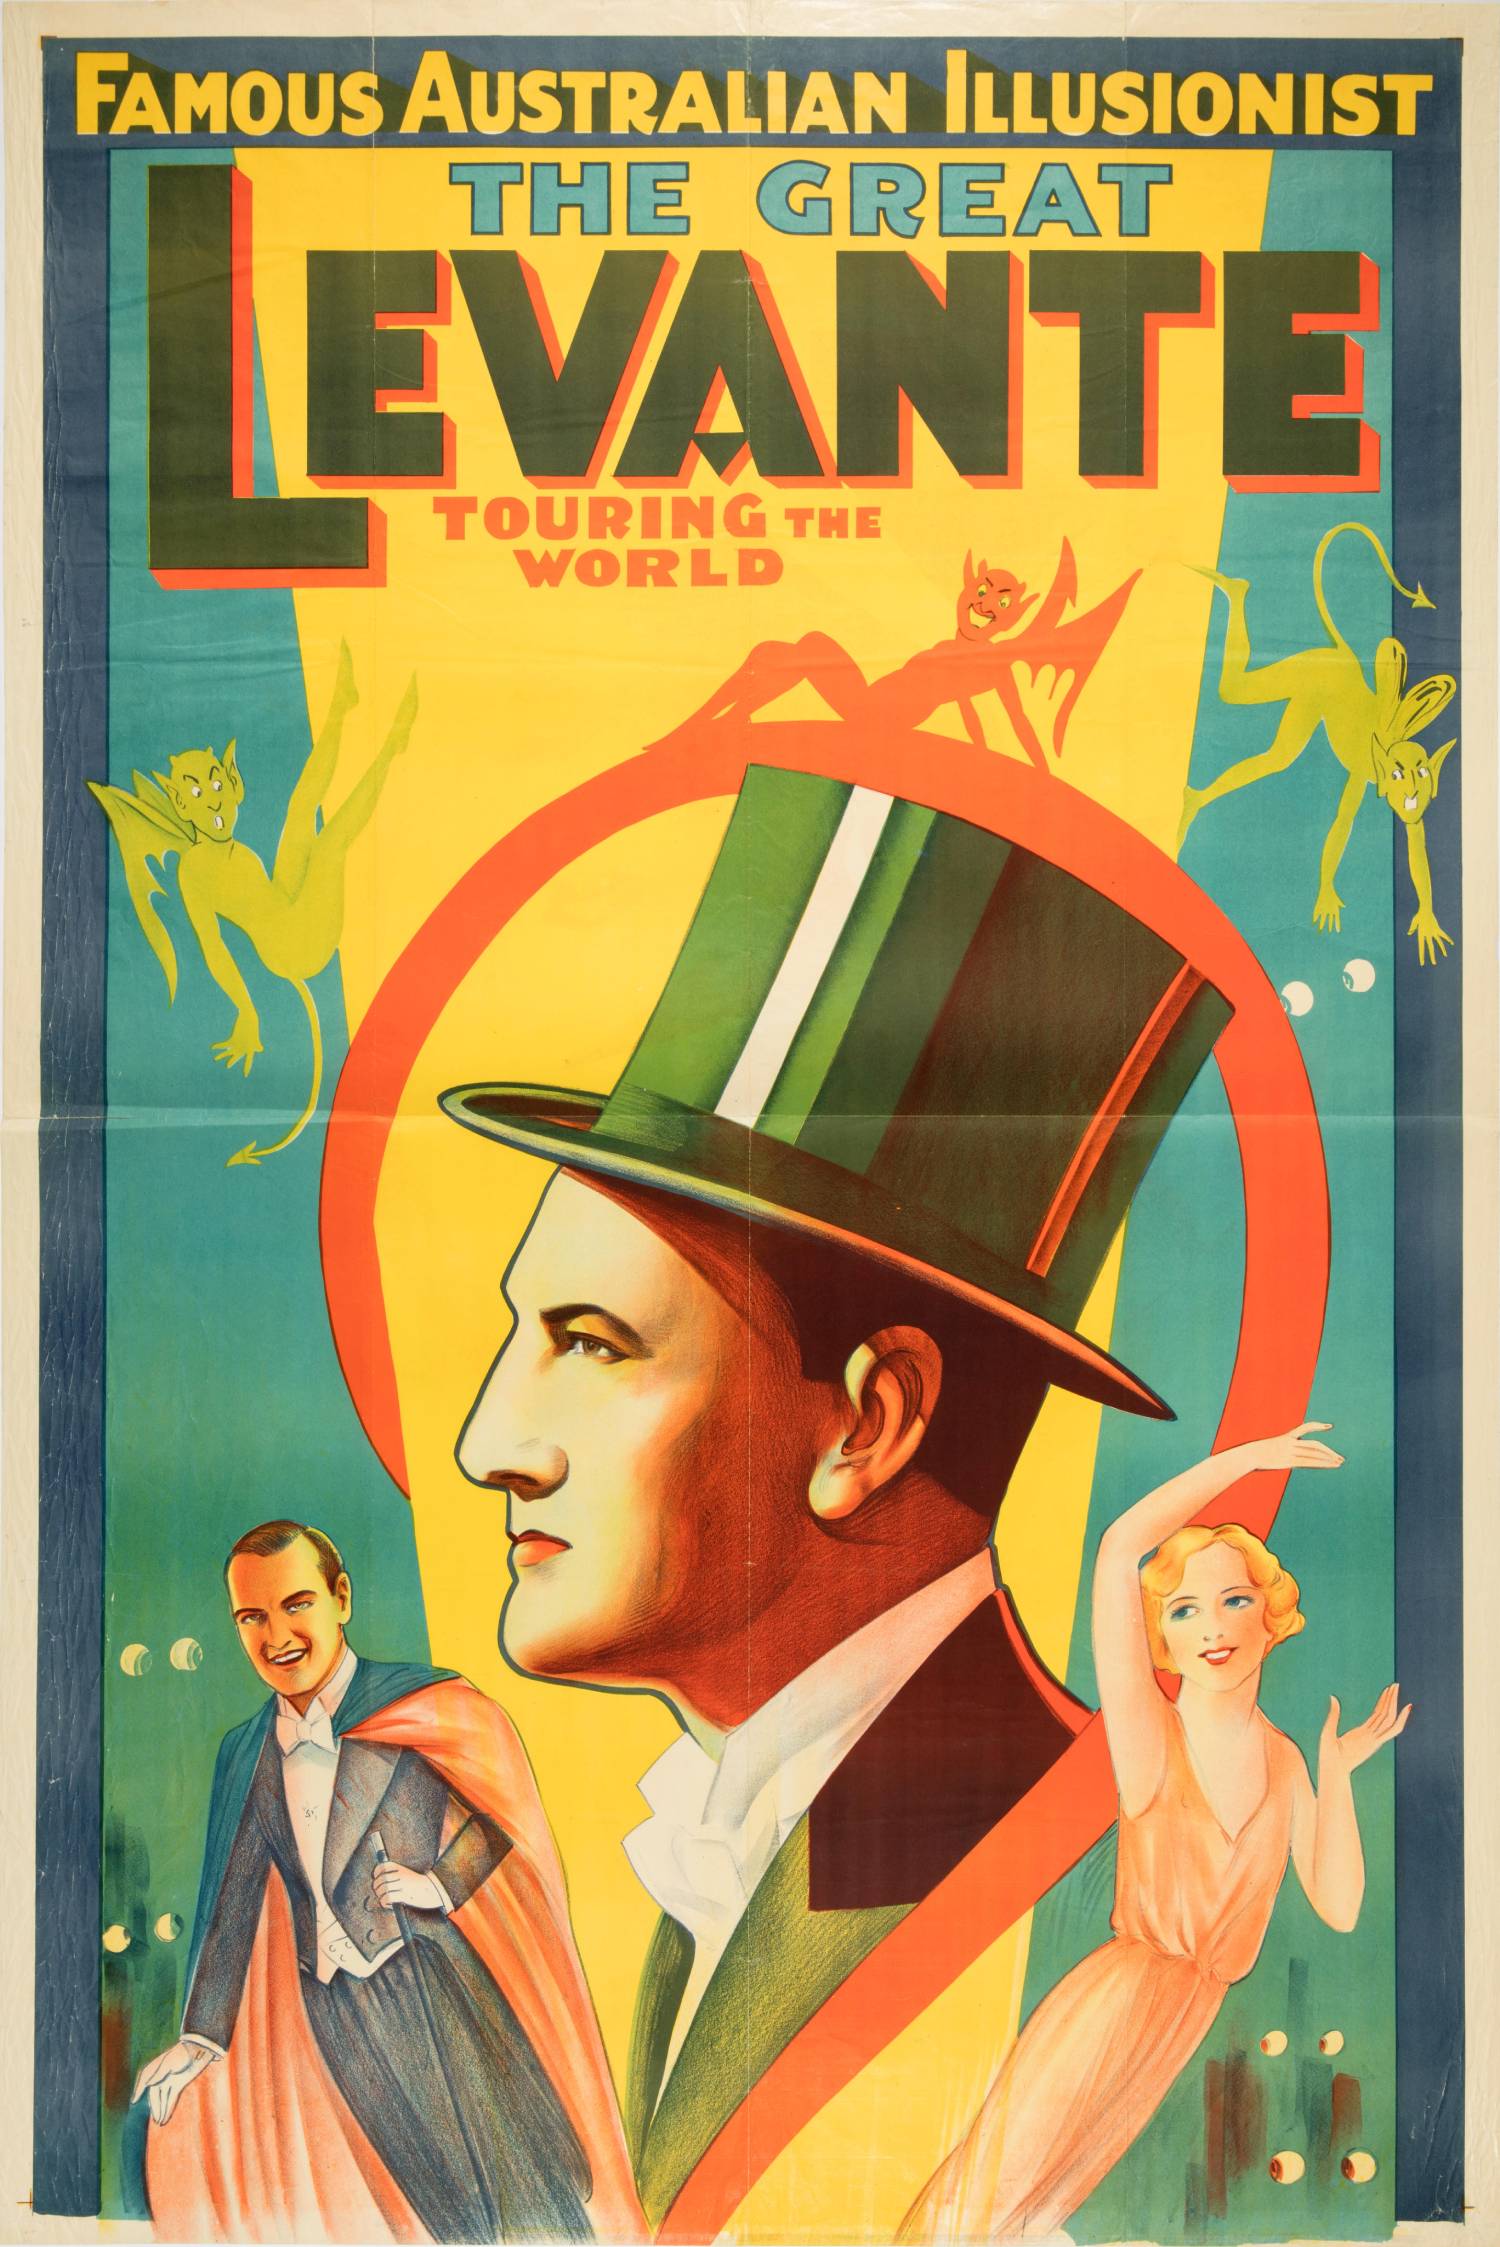 A poster of a magician in a top hat.